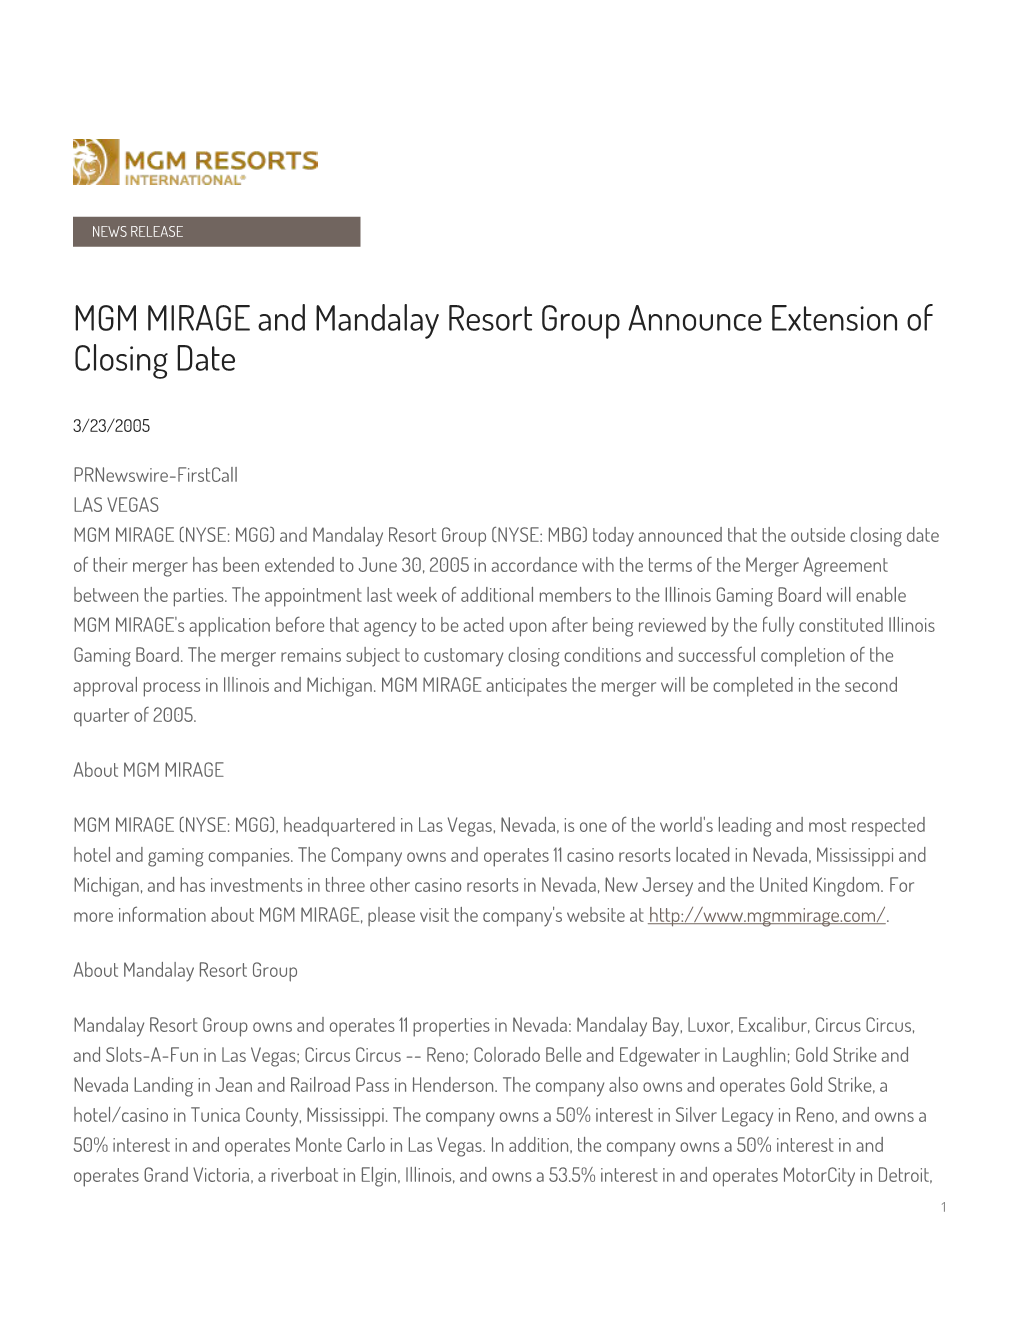 MGM MIRAGE and Mandalay Resort Group Announce Extension of Closing Date